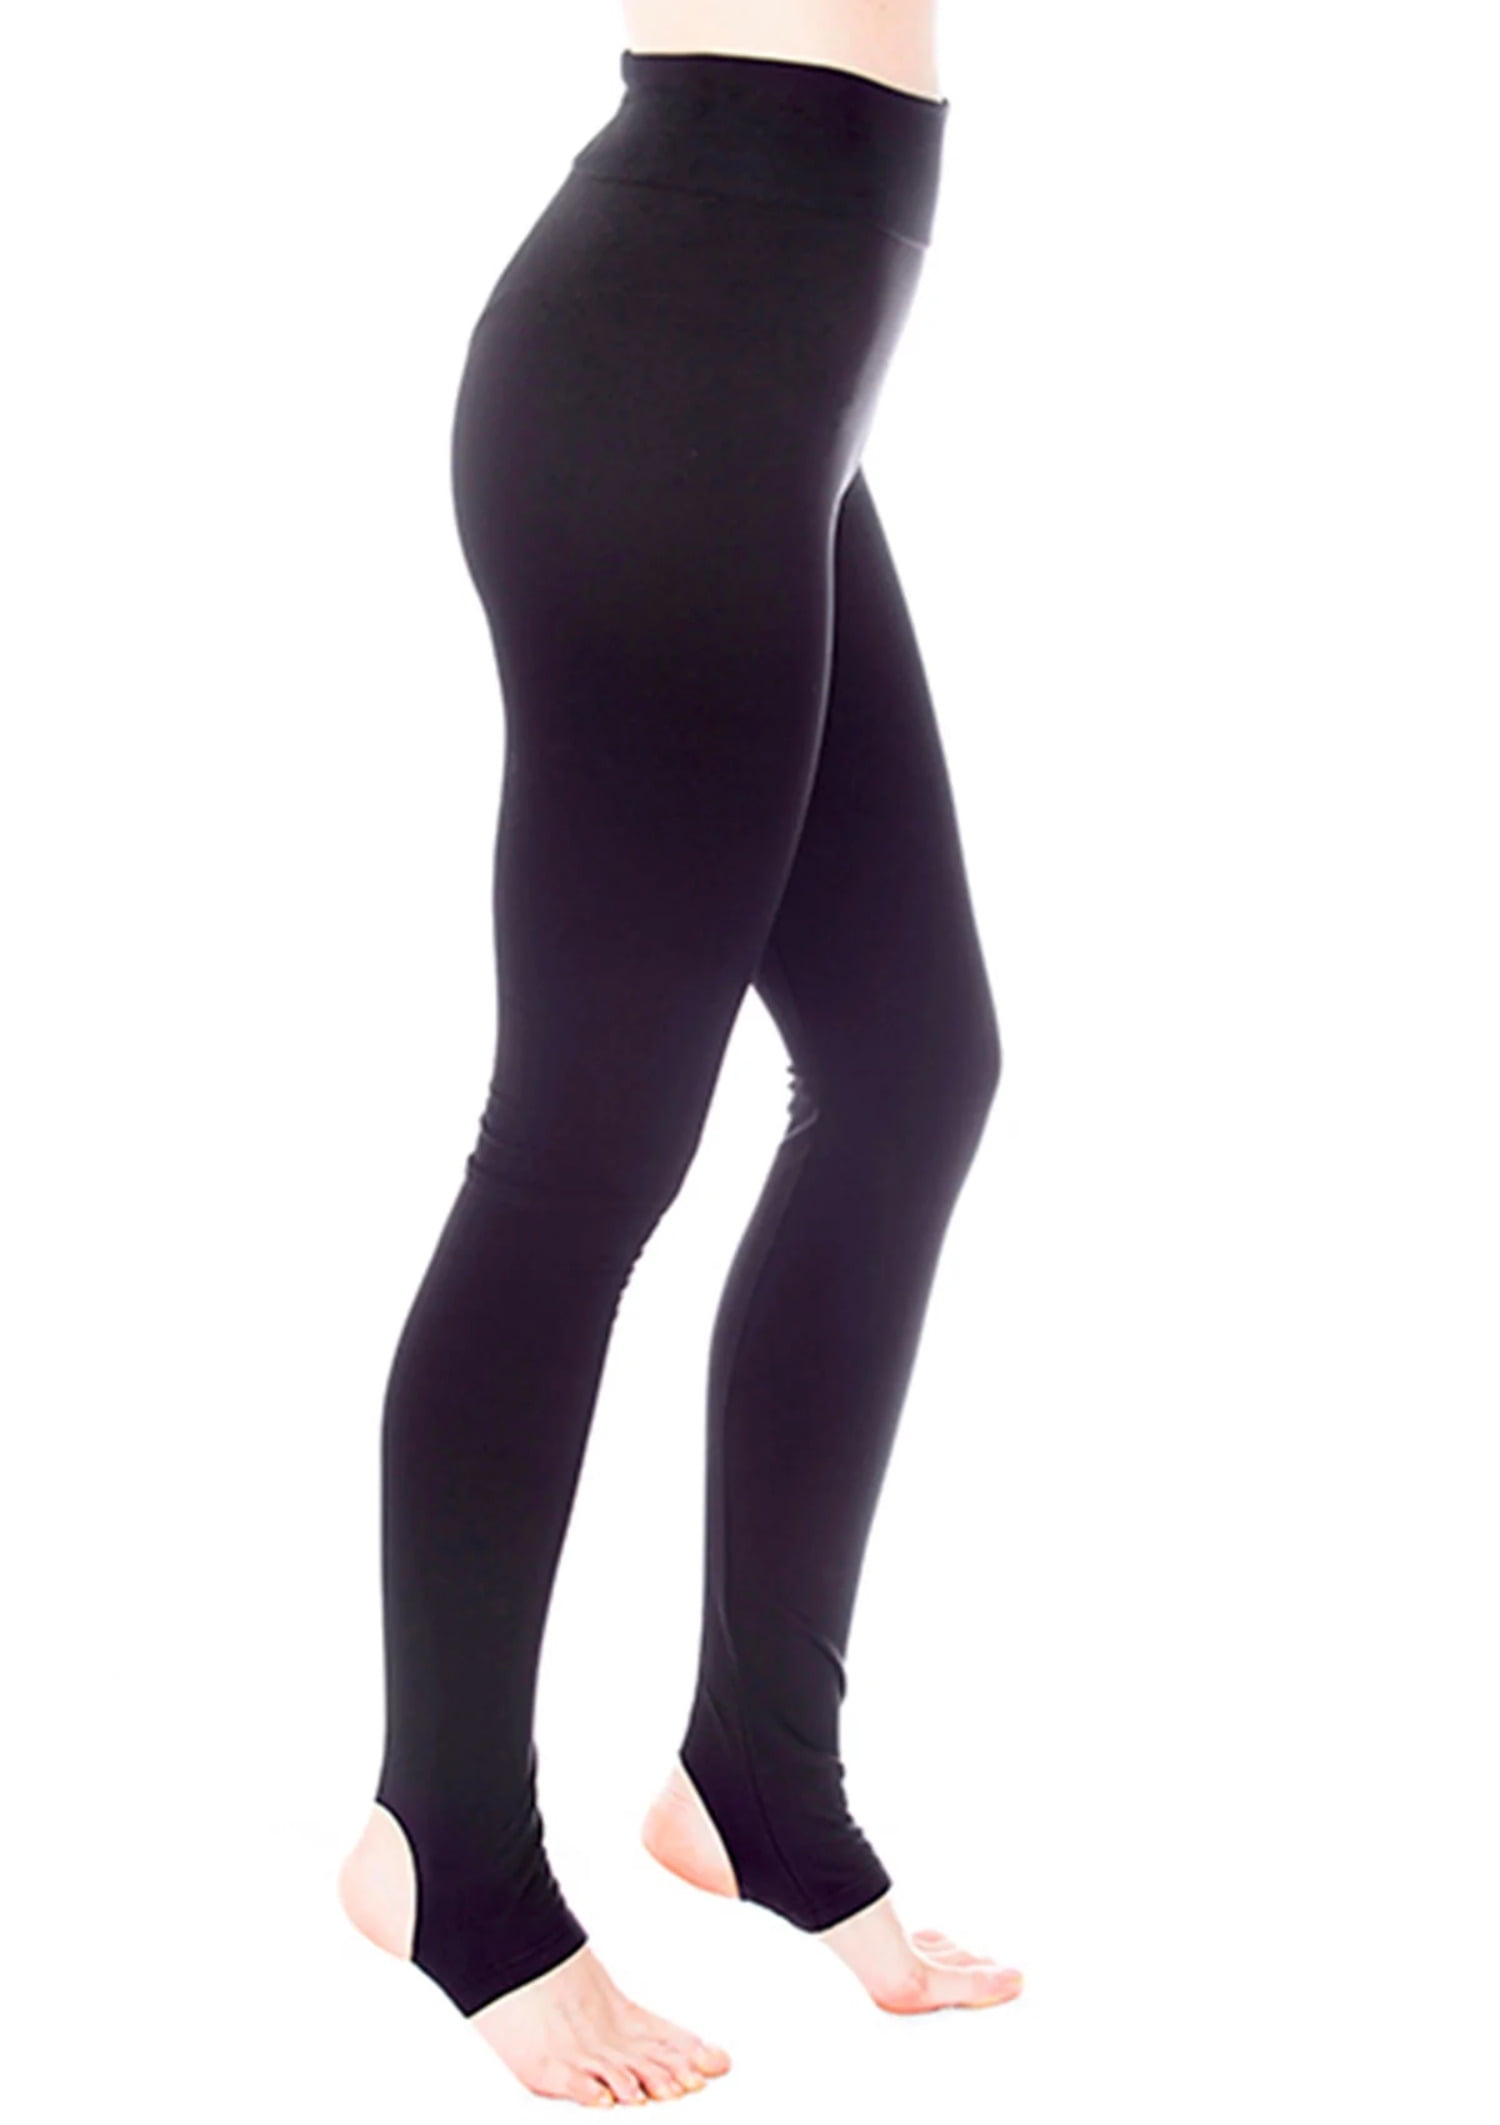 RBX Active Women's Micro Rib Side Squat Proof Workout Legging With